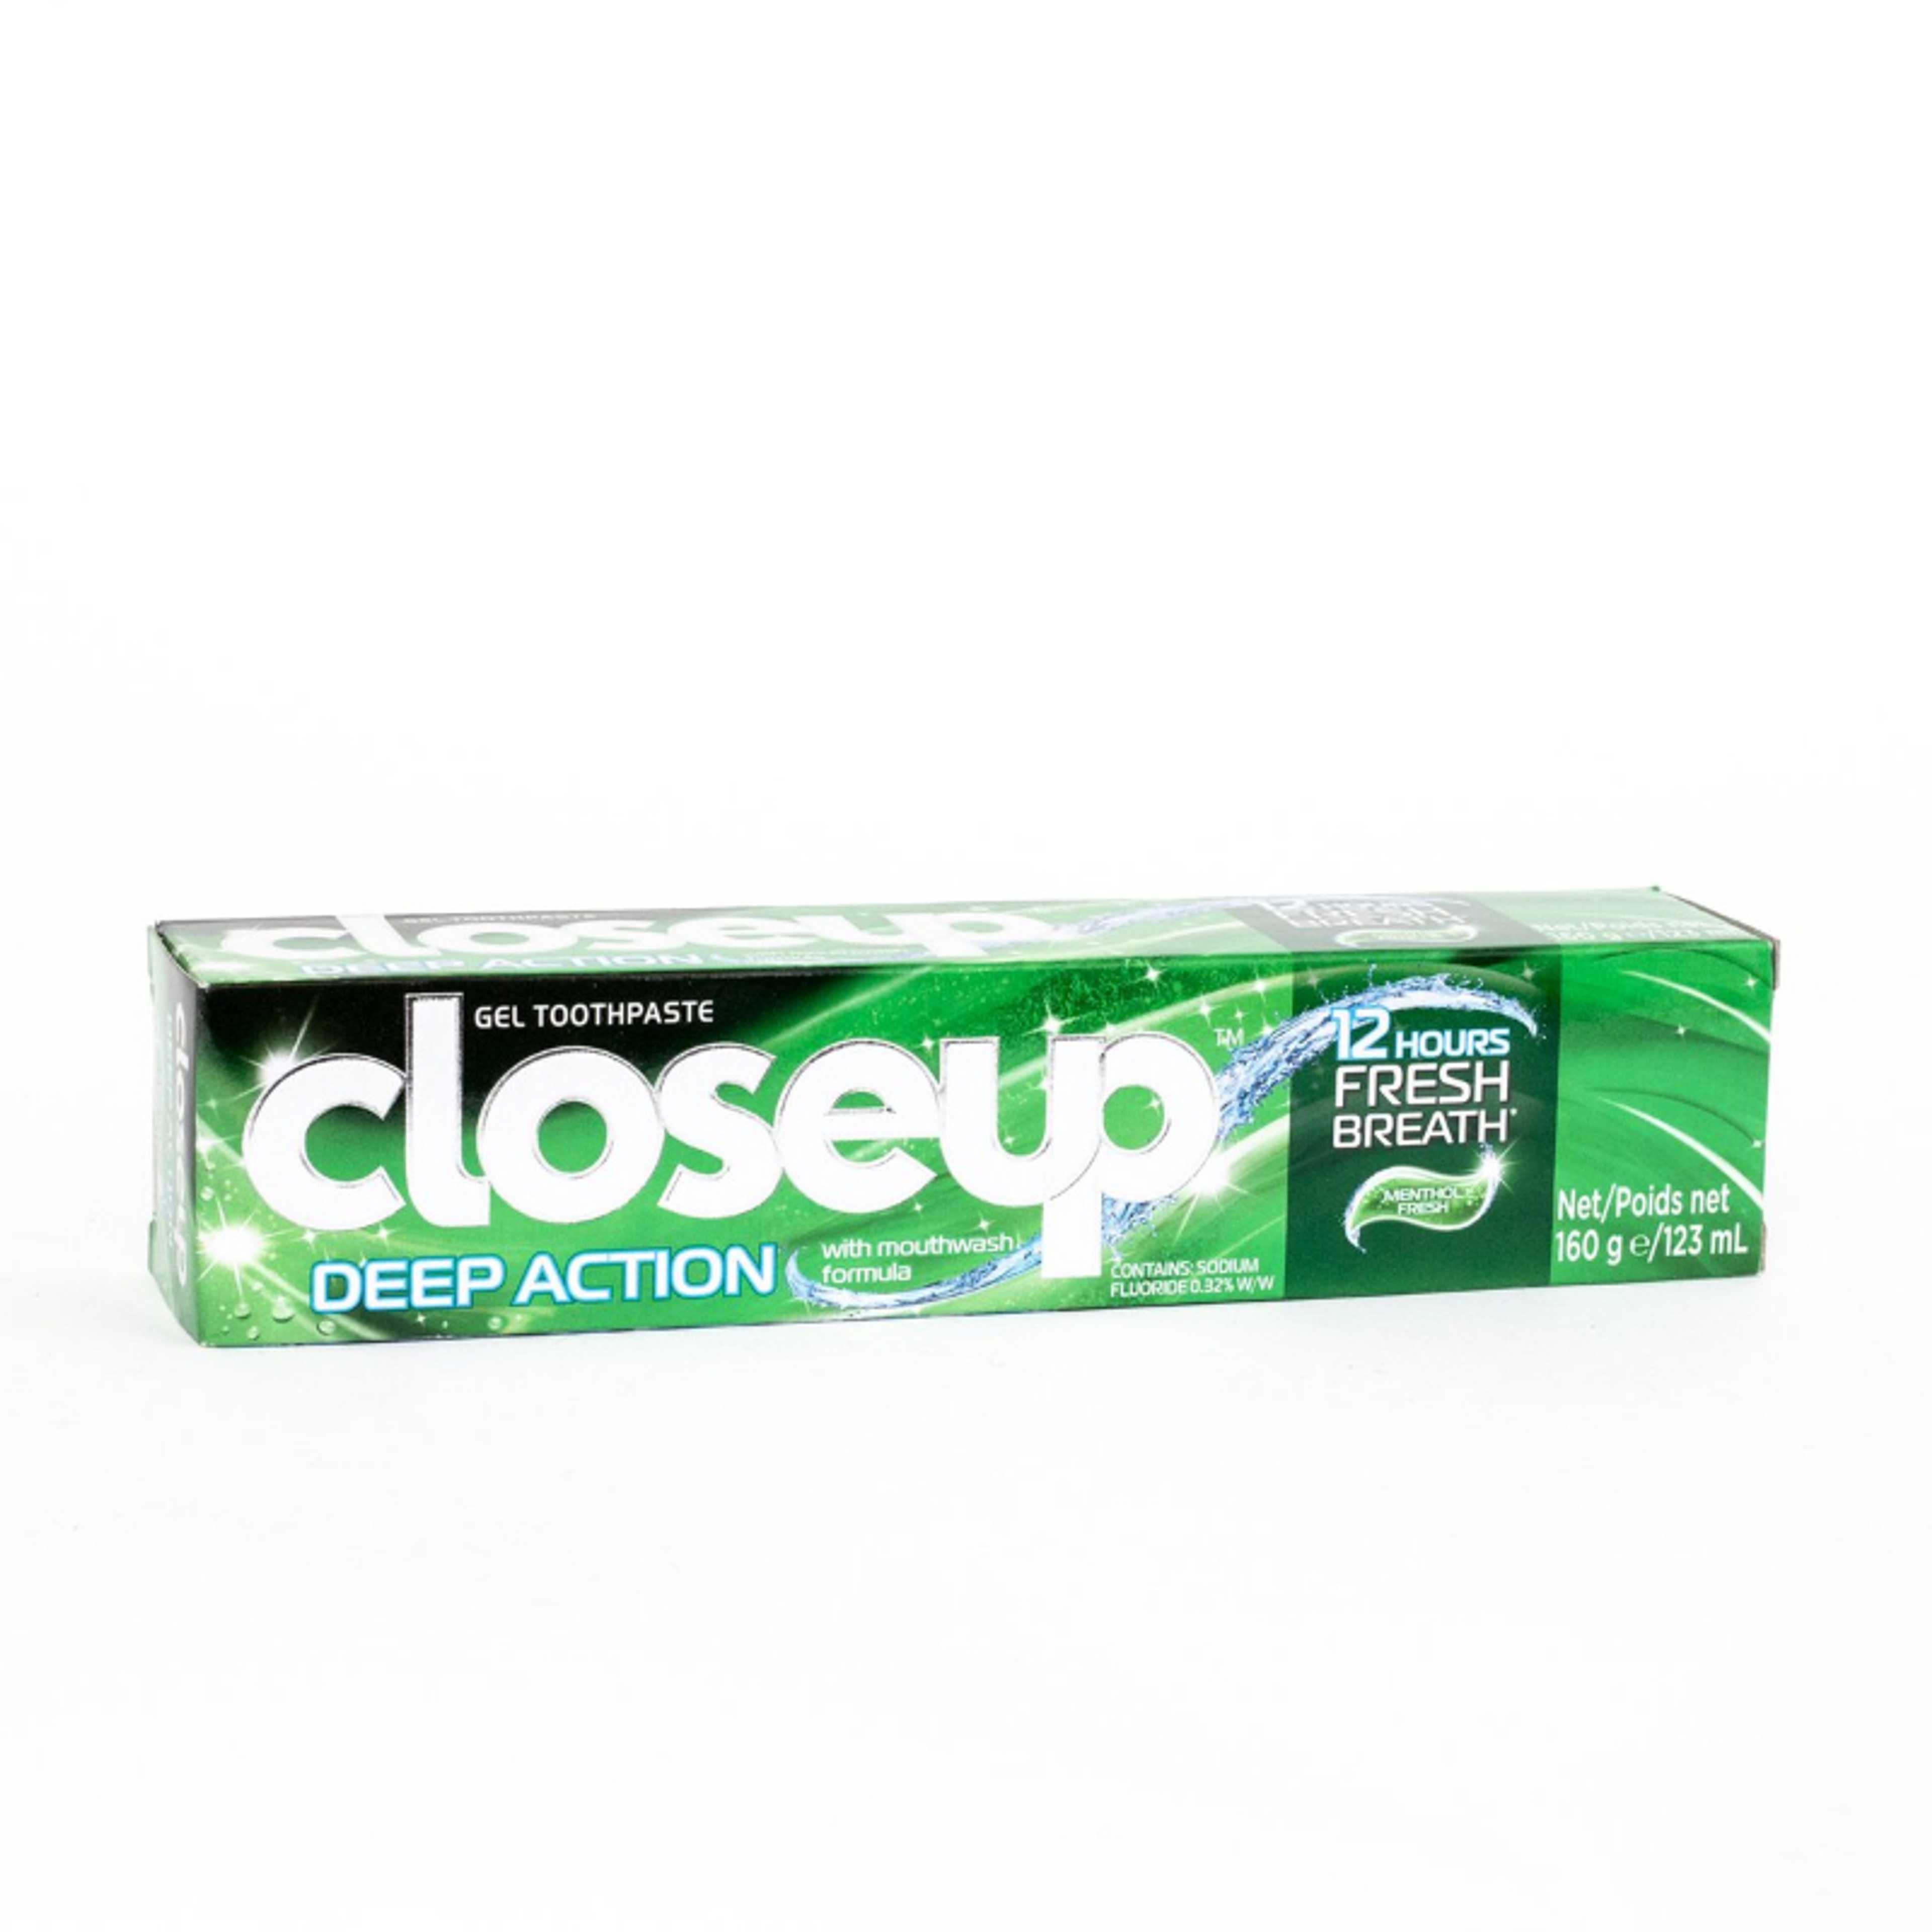 CLOSE UP TOOTH PASTE DEEP ACTION MENTHOL FRESH 160G/123ML